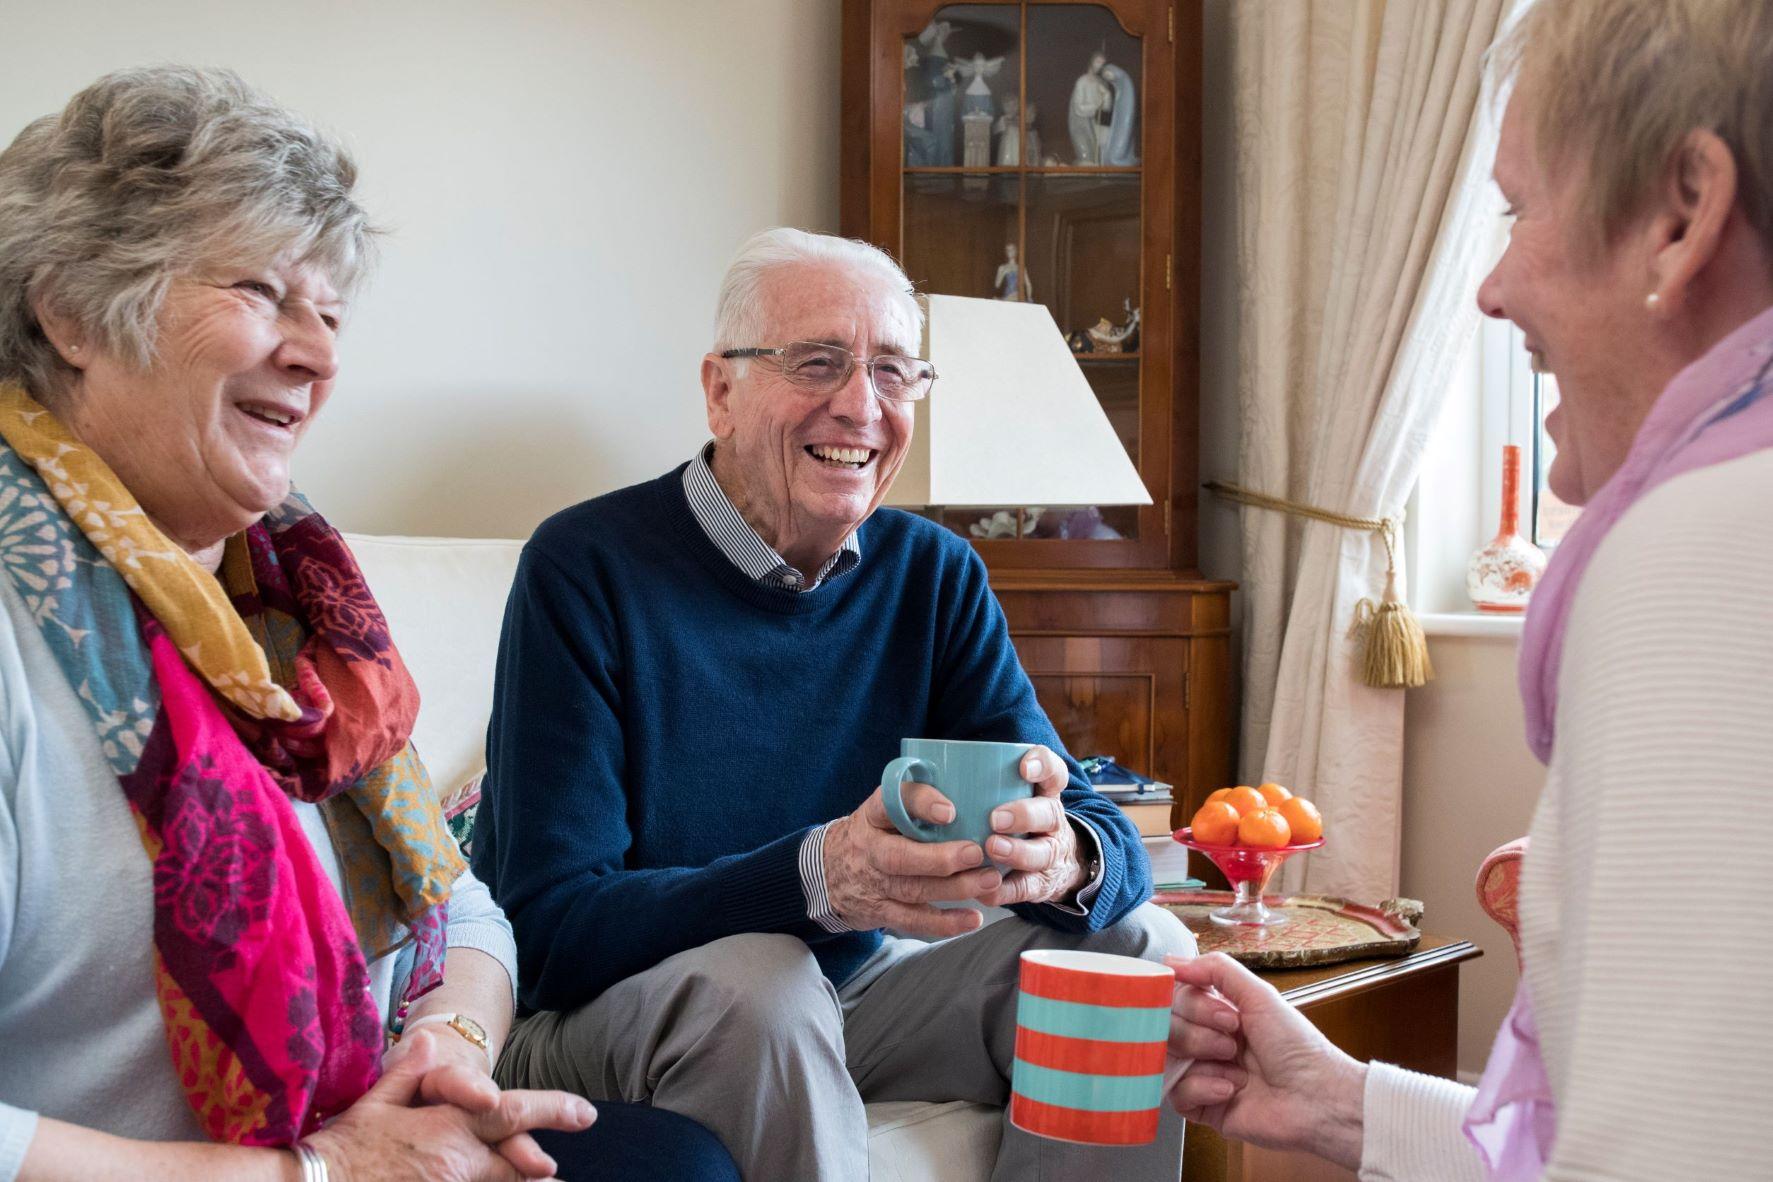 Older adults invited to trial new technologies in their home to help support independent living